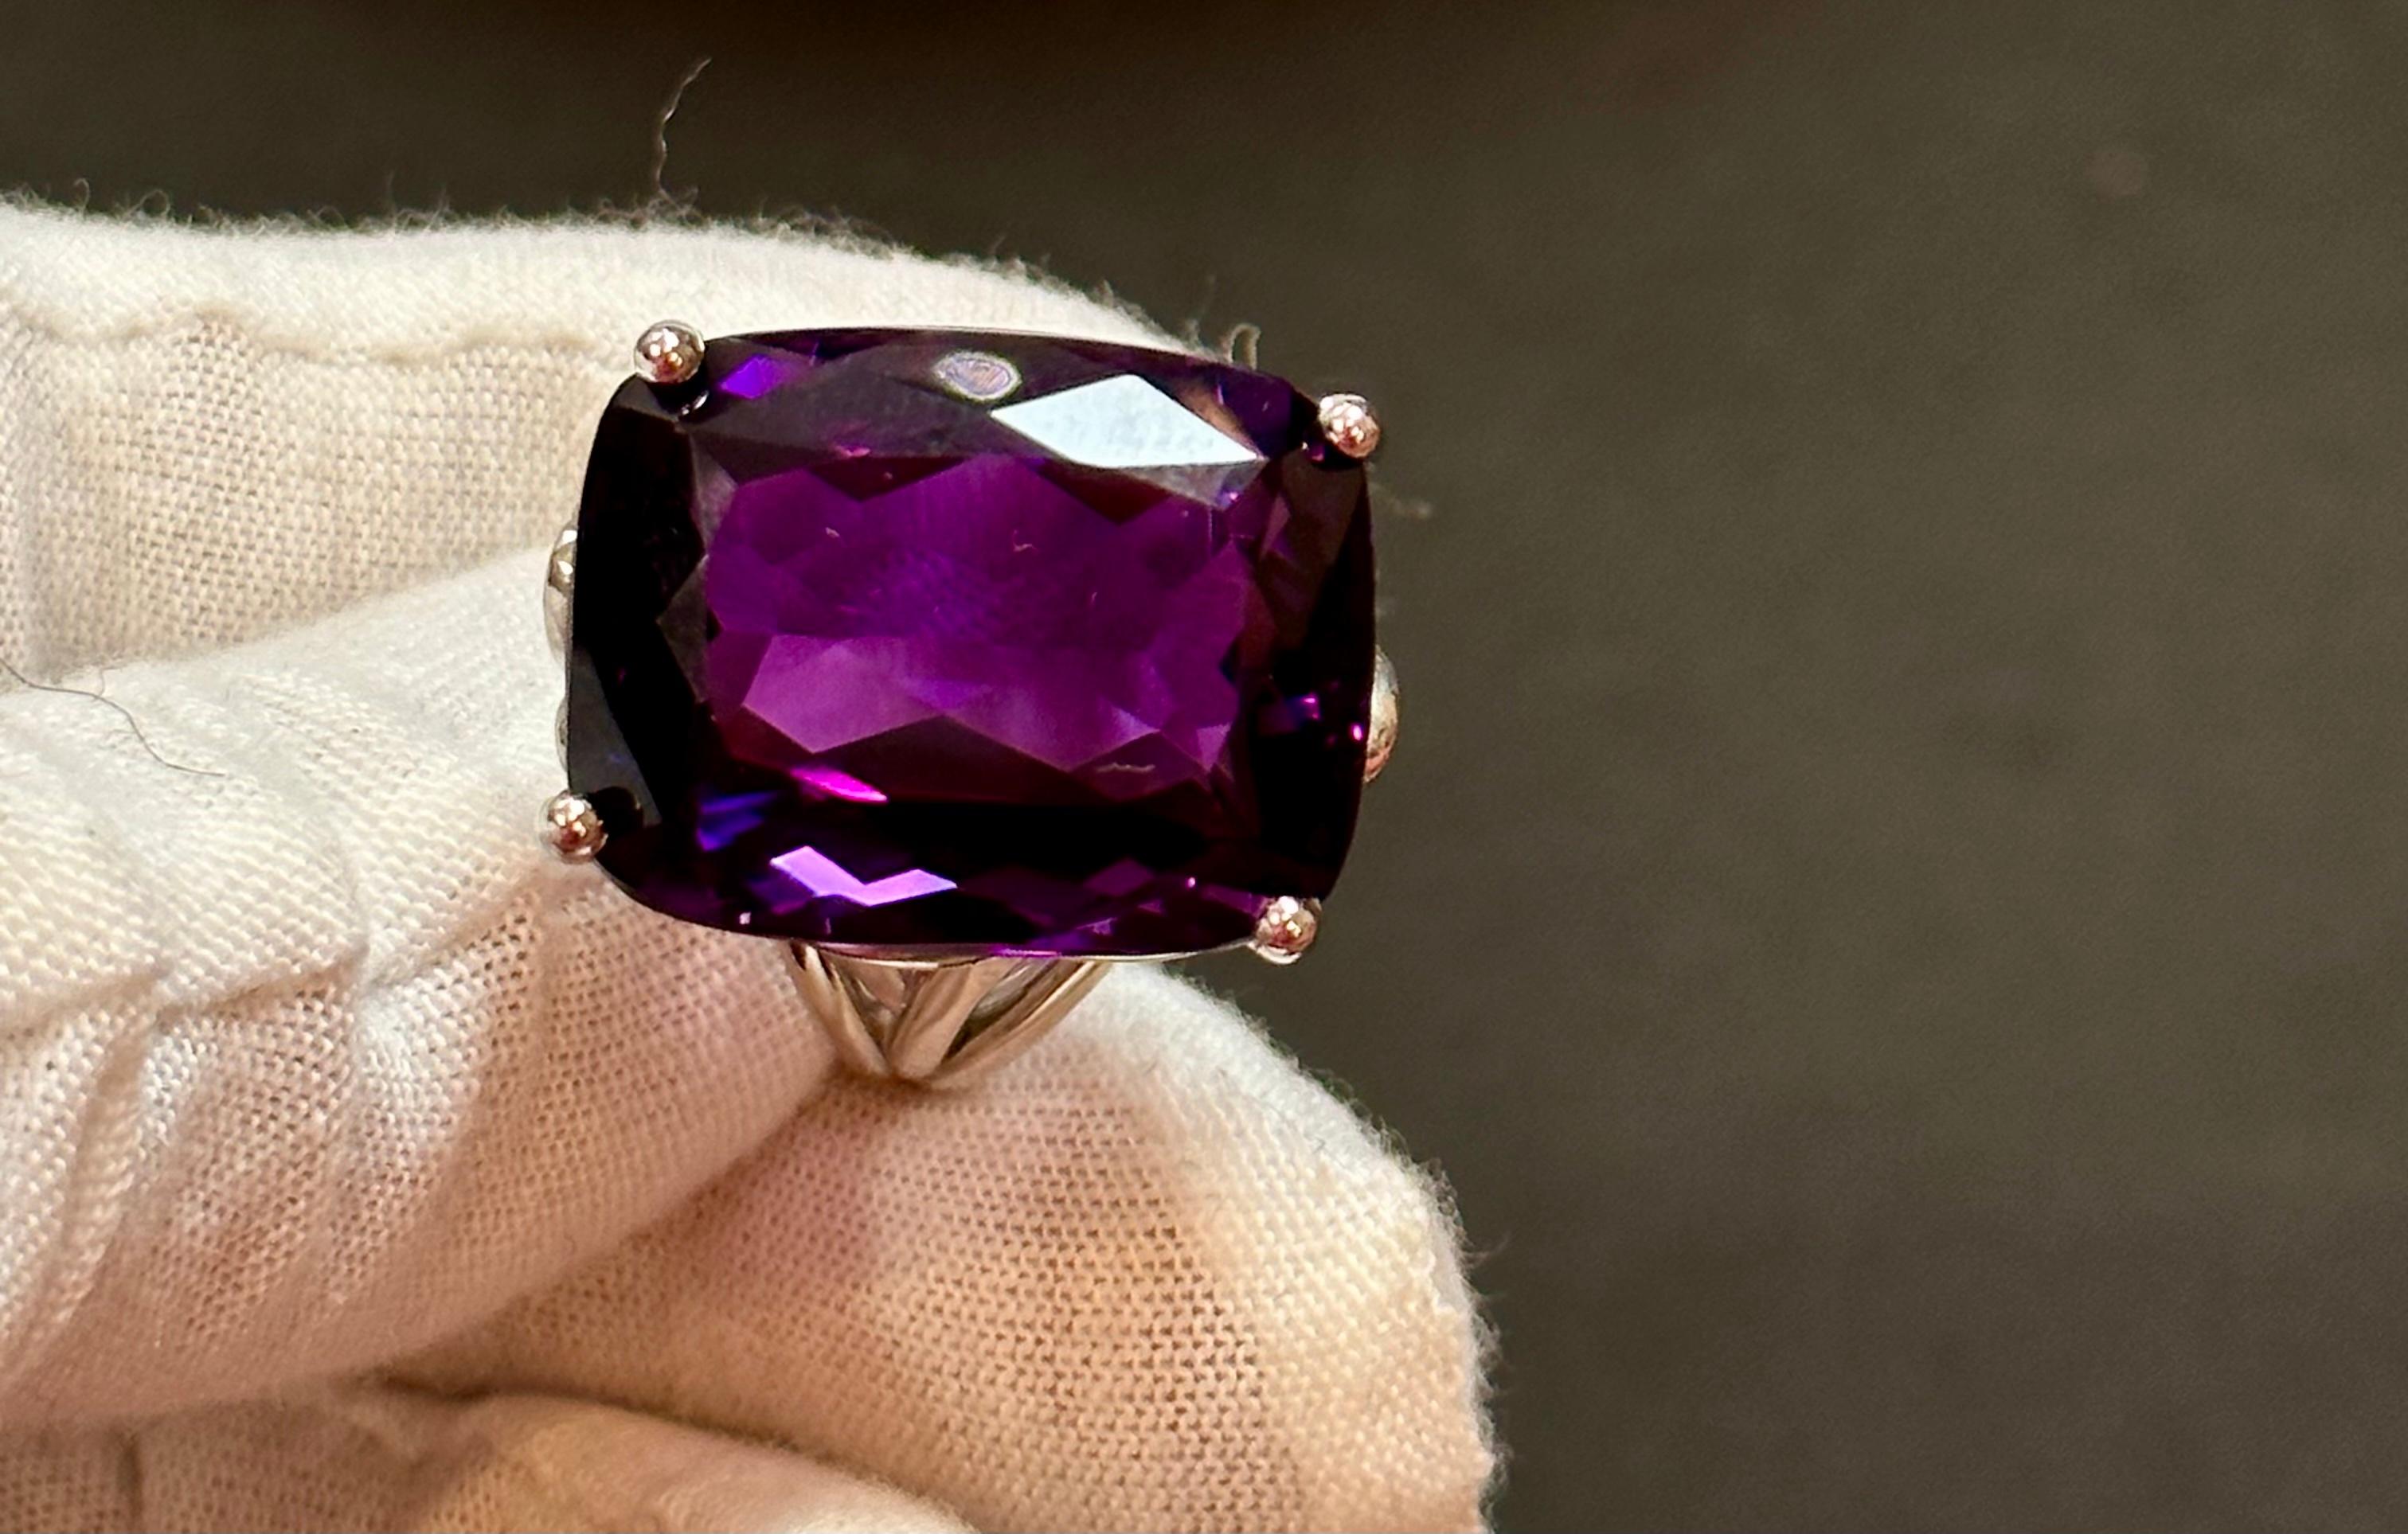  This vintage cocktail ring is a stunning piece of jewelry that features a huge 38 carat cushion-cut natural amethyst set in platinum. The amethyst measures 17 x 21 mm, giving the ring a substantial size and presence. The weight of the ring with the